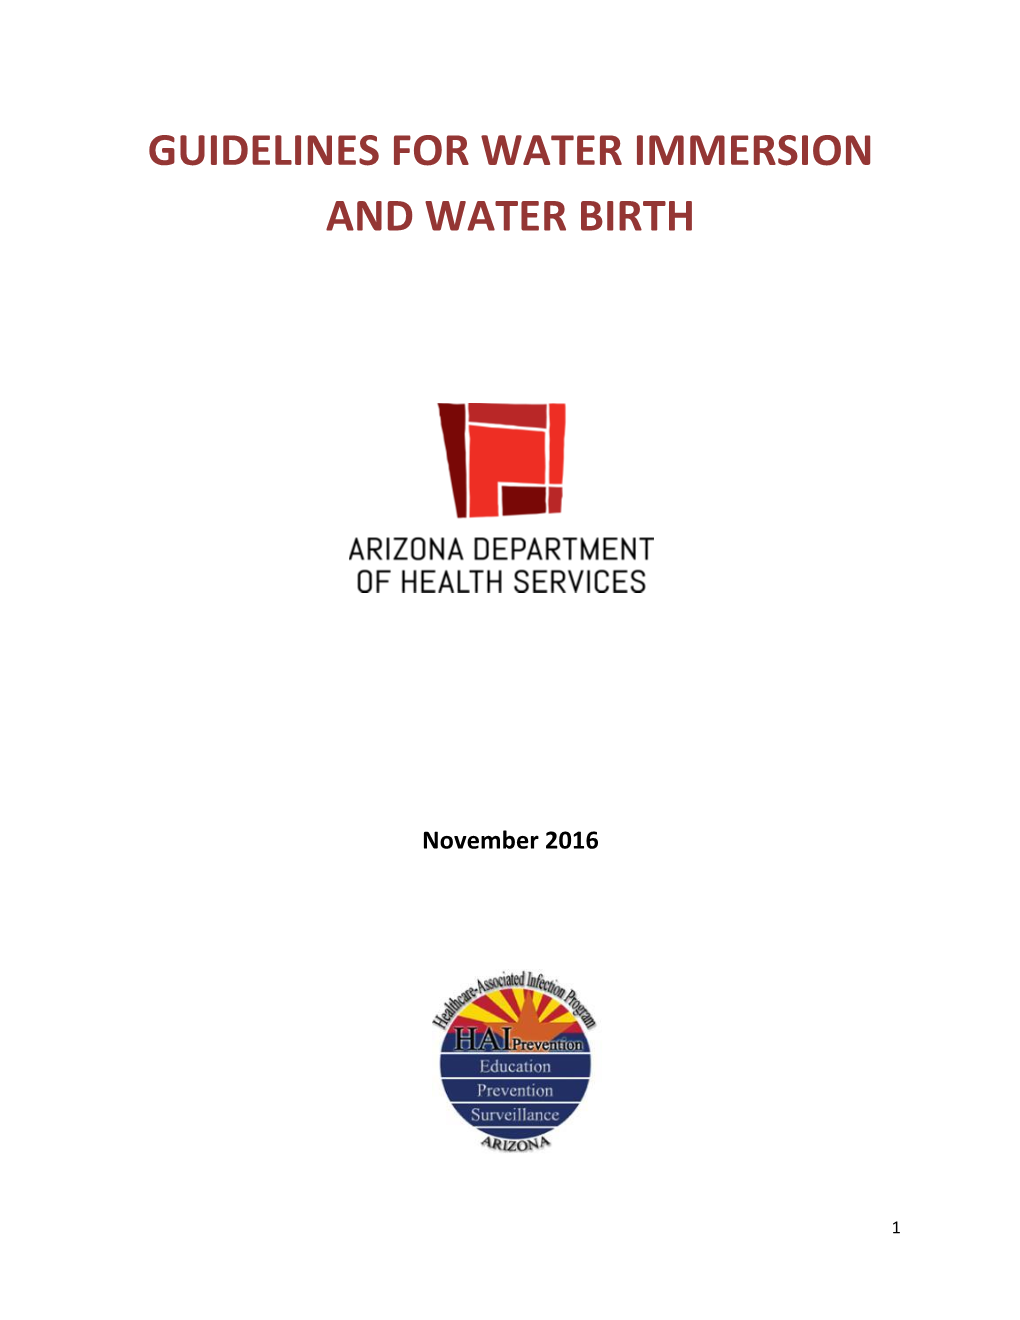 Guidelines for Water Immersion and Water Birth